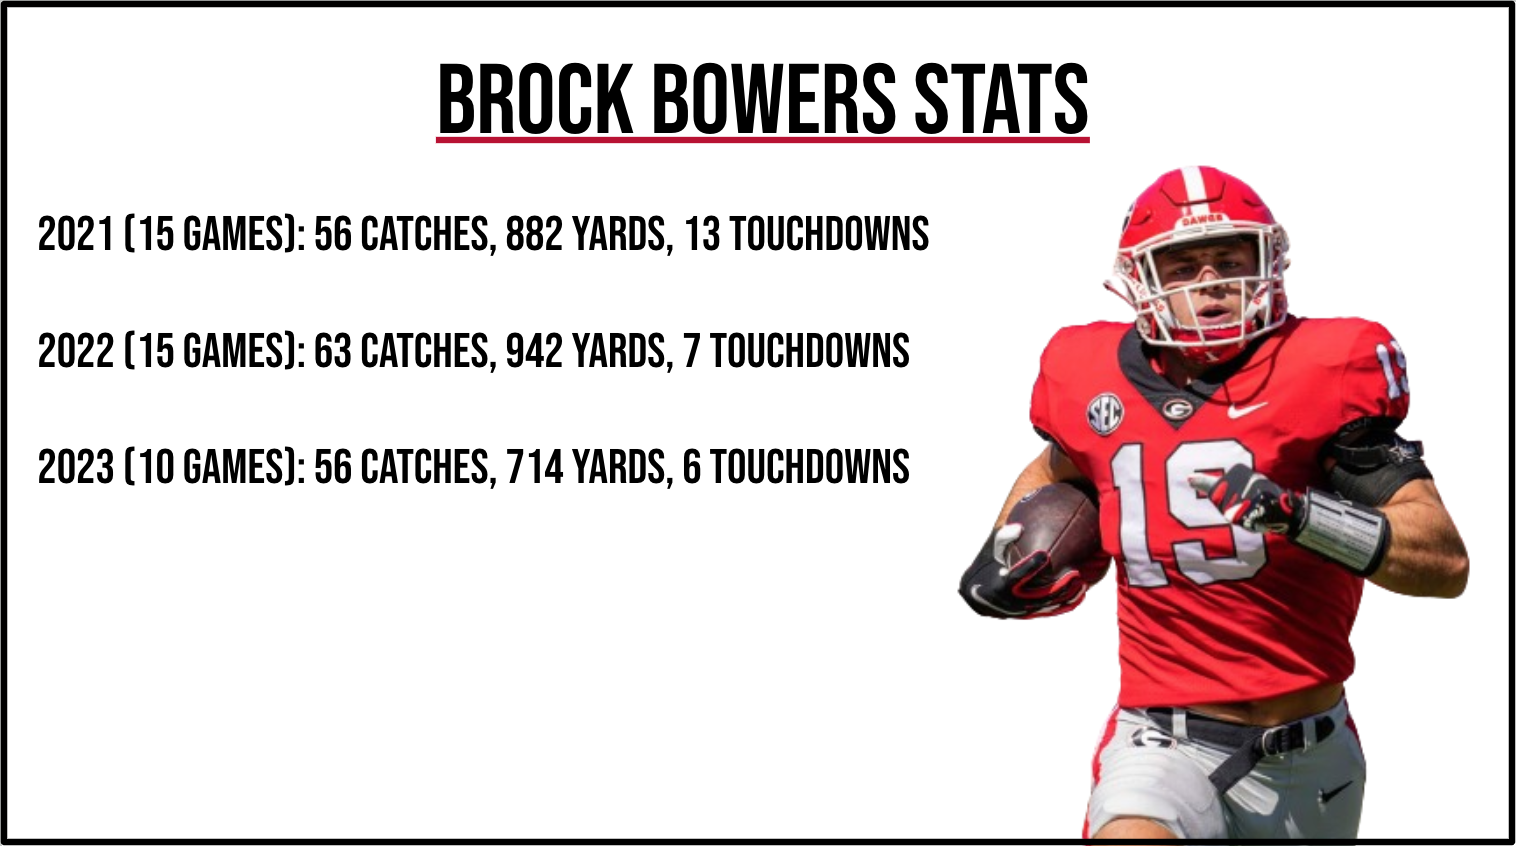 Brock Bowers: The Dynasty TE1?